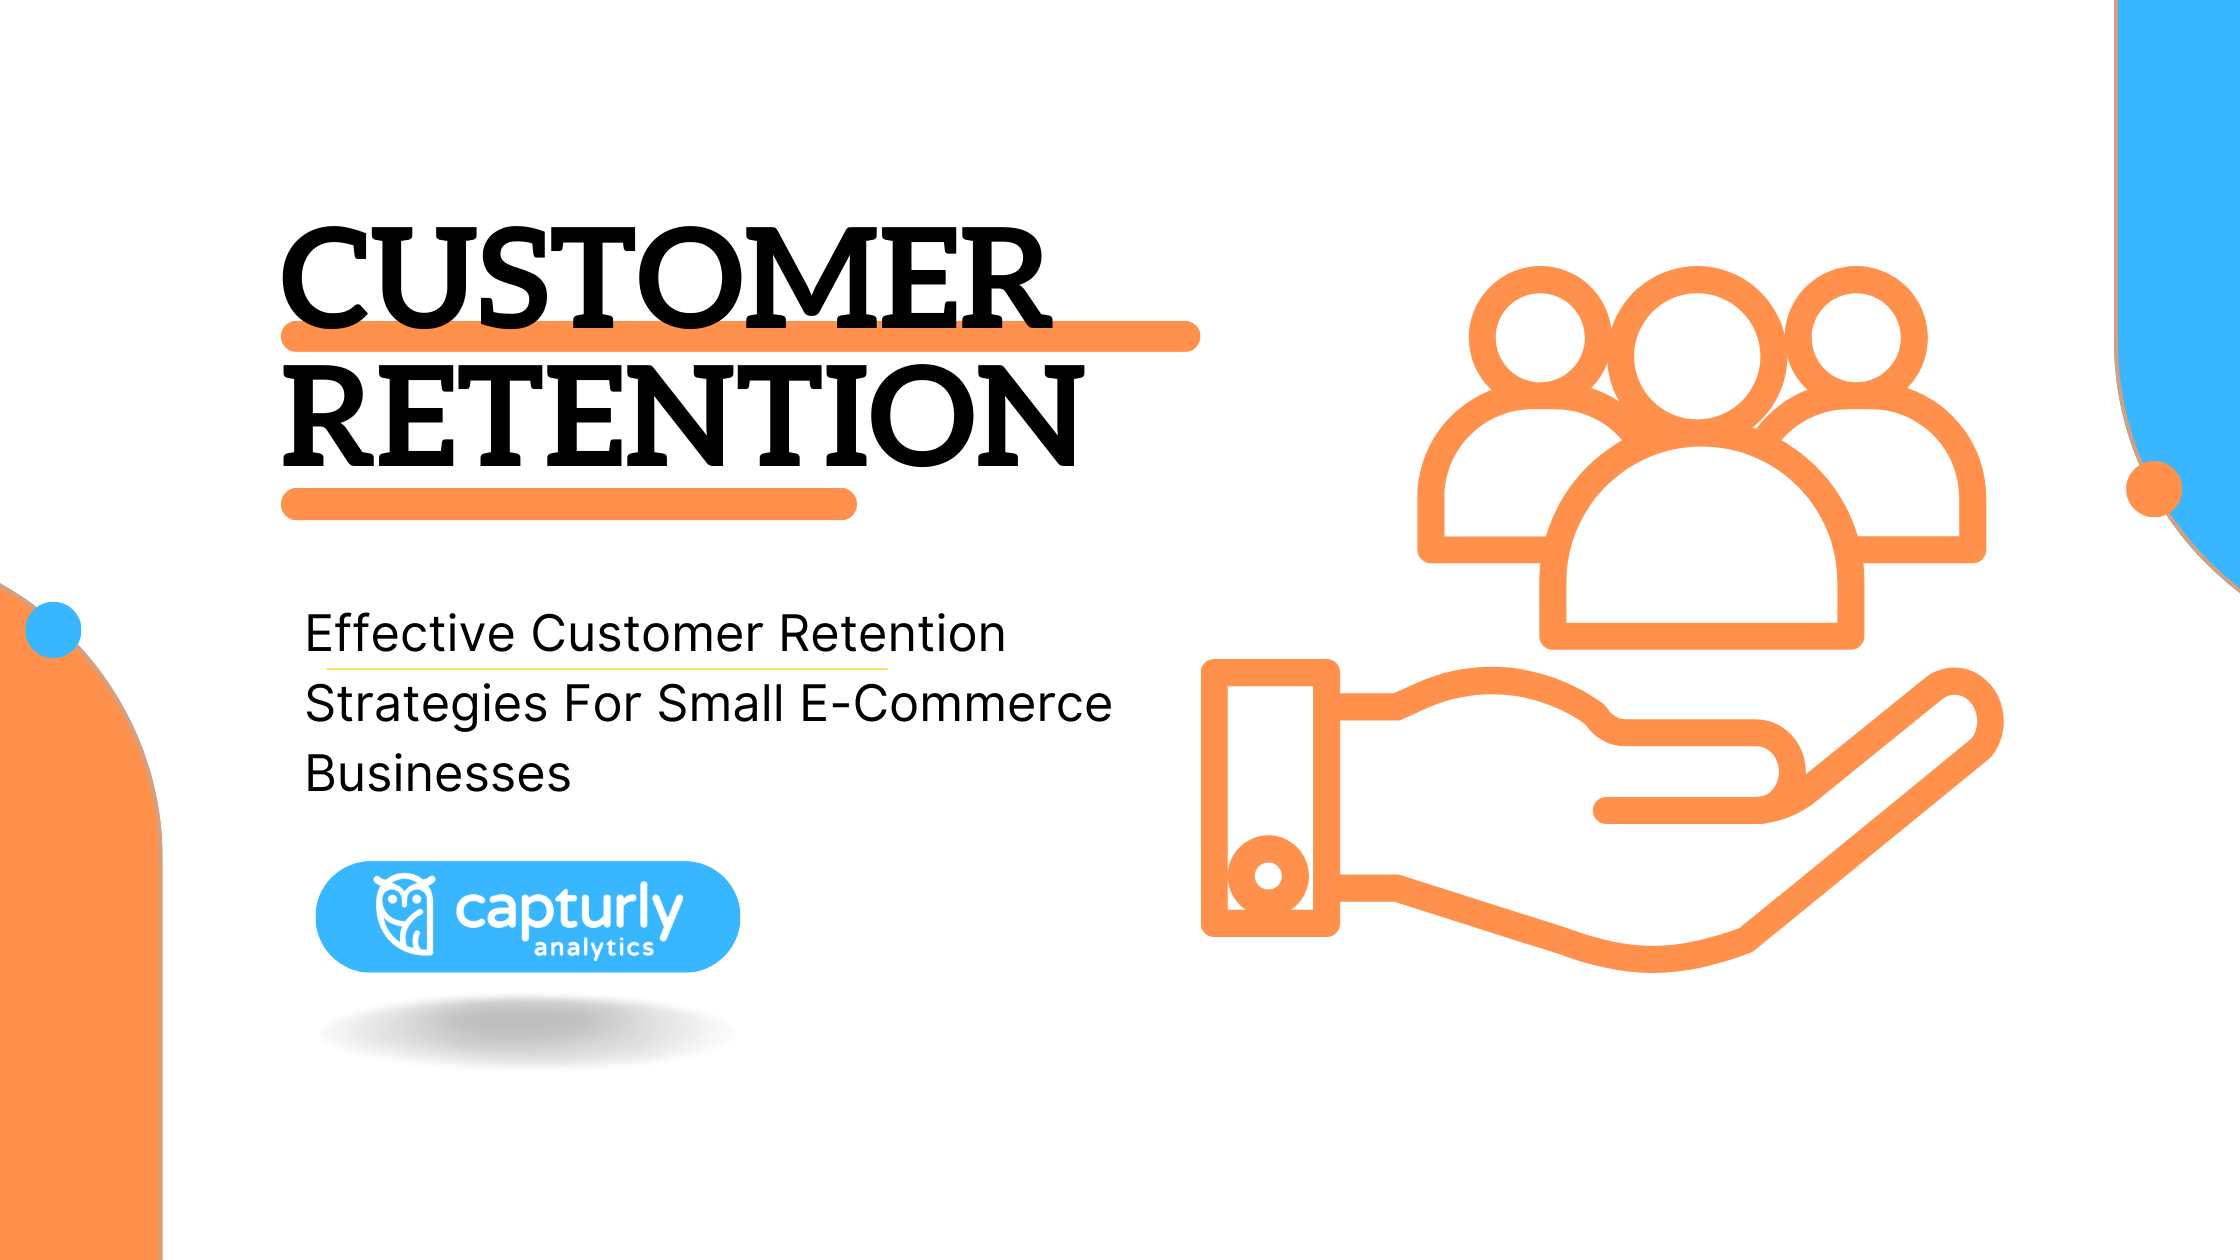 The title, Effective Customer Retention Strategies For Small E-Commerce Businesses, and a hand holding customers.